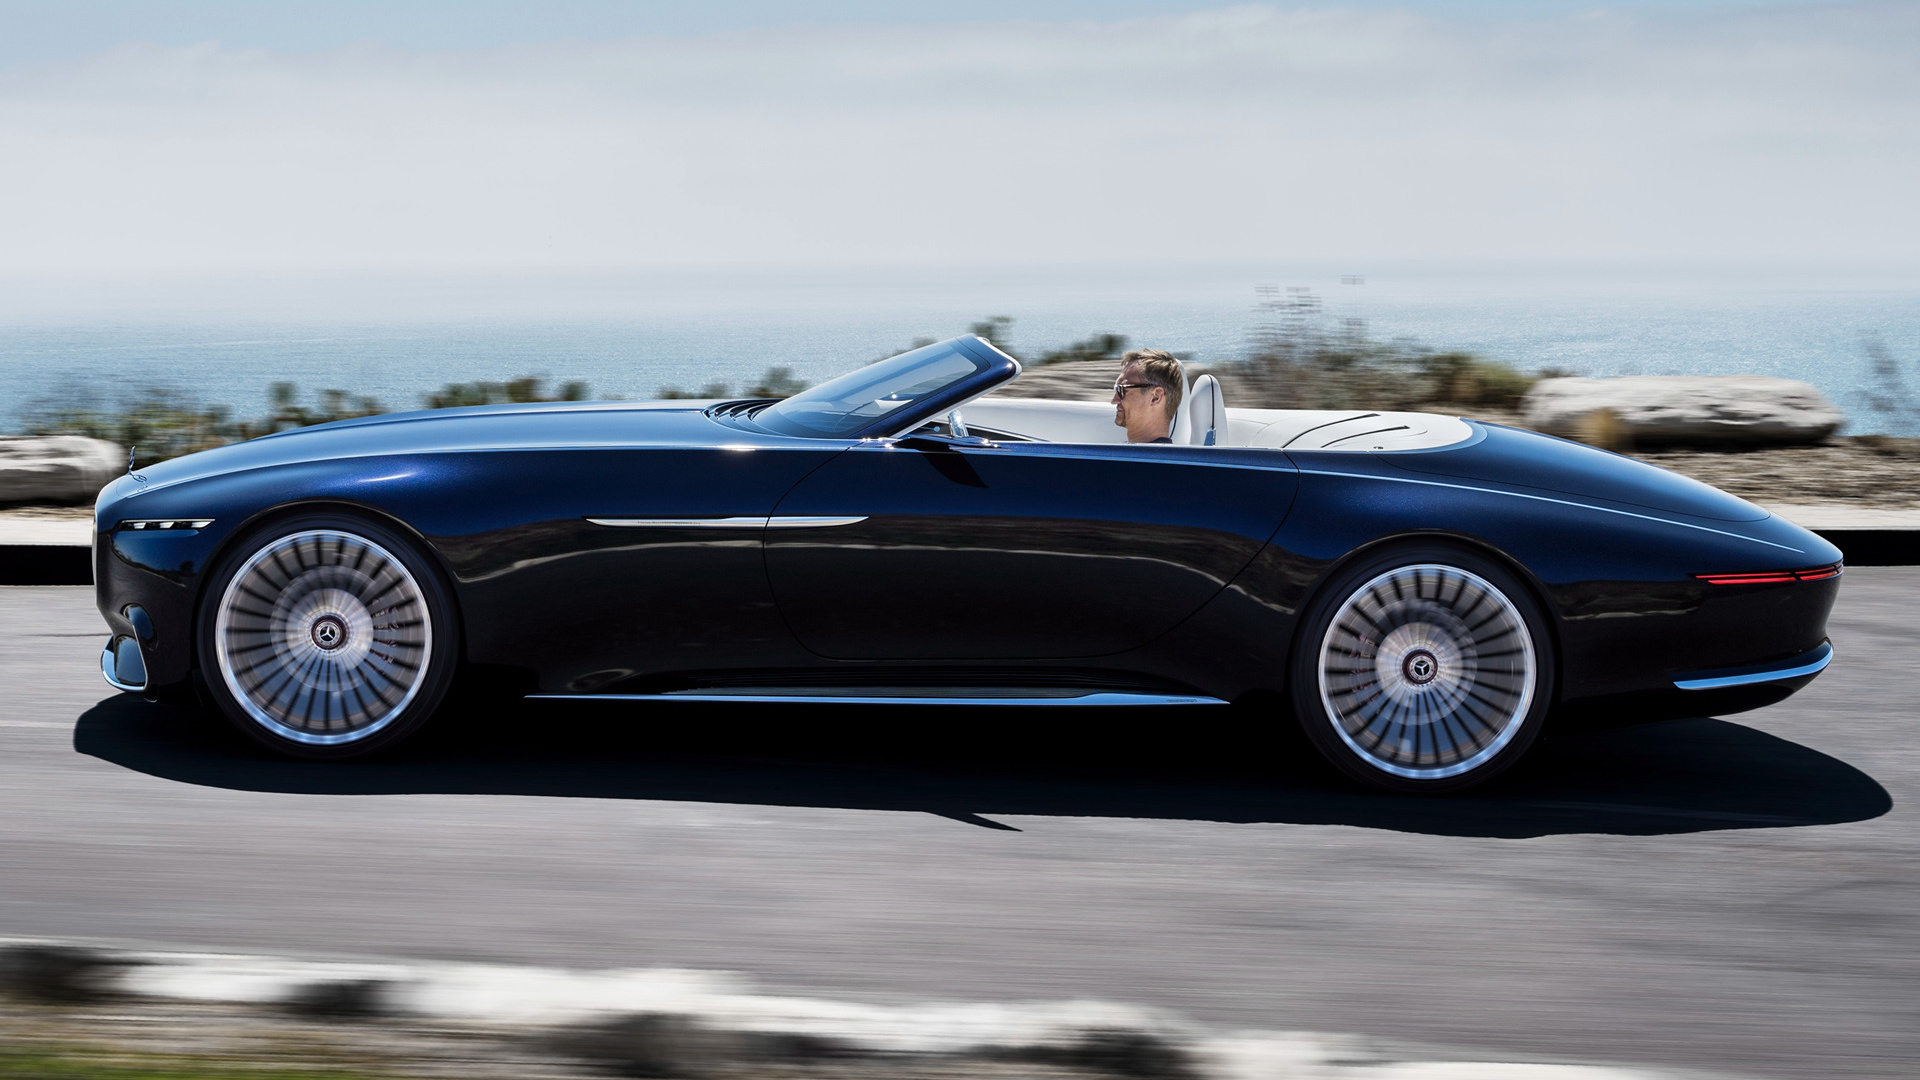 Mercedes Maybach 6 Cabriolet Wallpapers